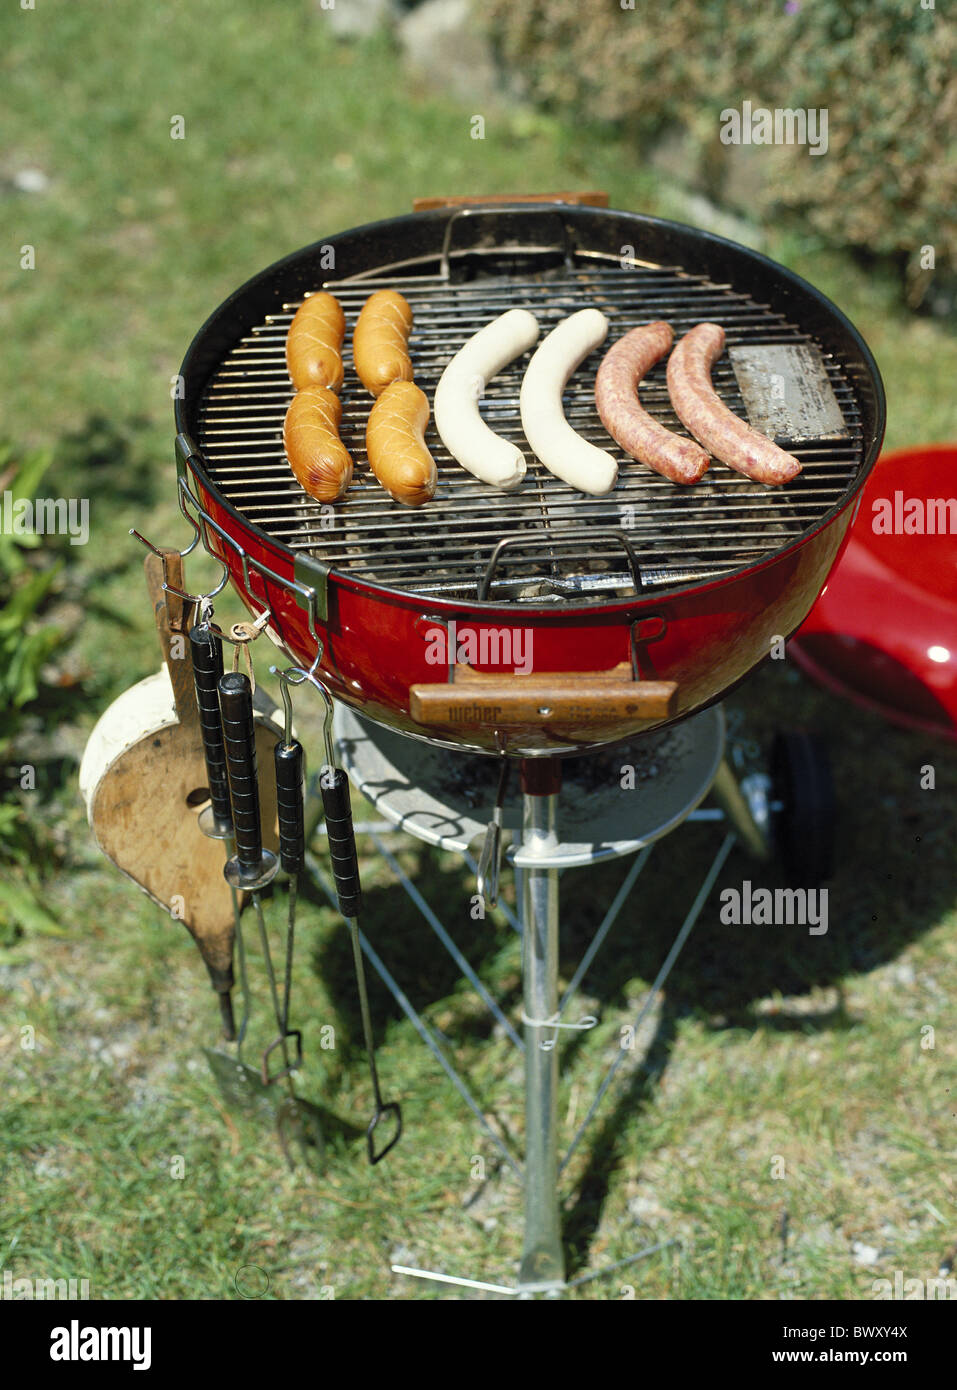 cutlery silverware bellows grill barbecue sausages Food food eating cooking boiling barbecue Stock Photo